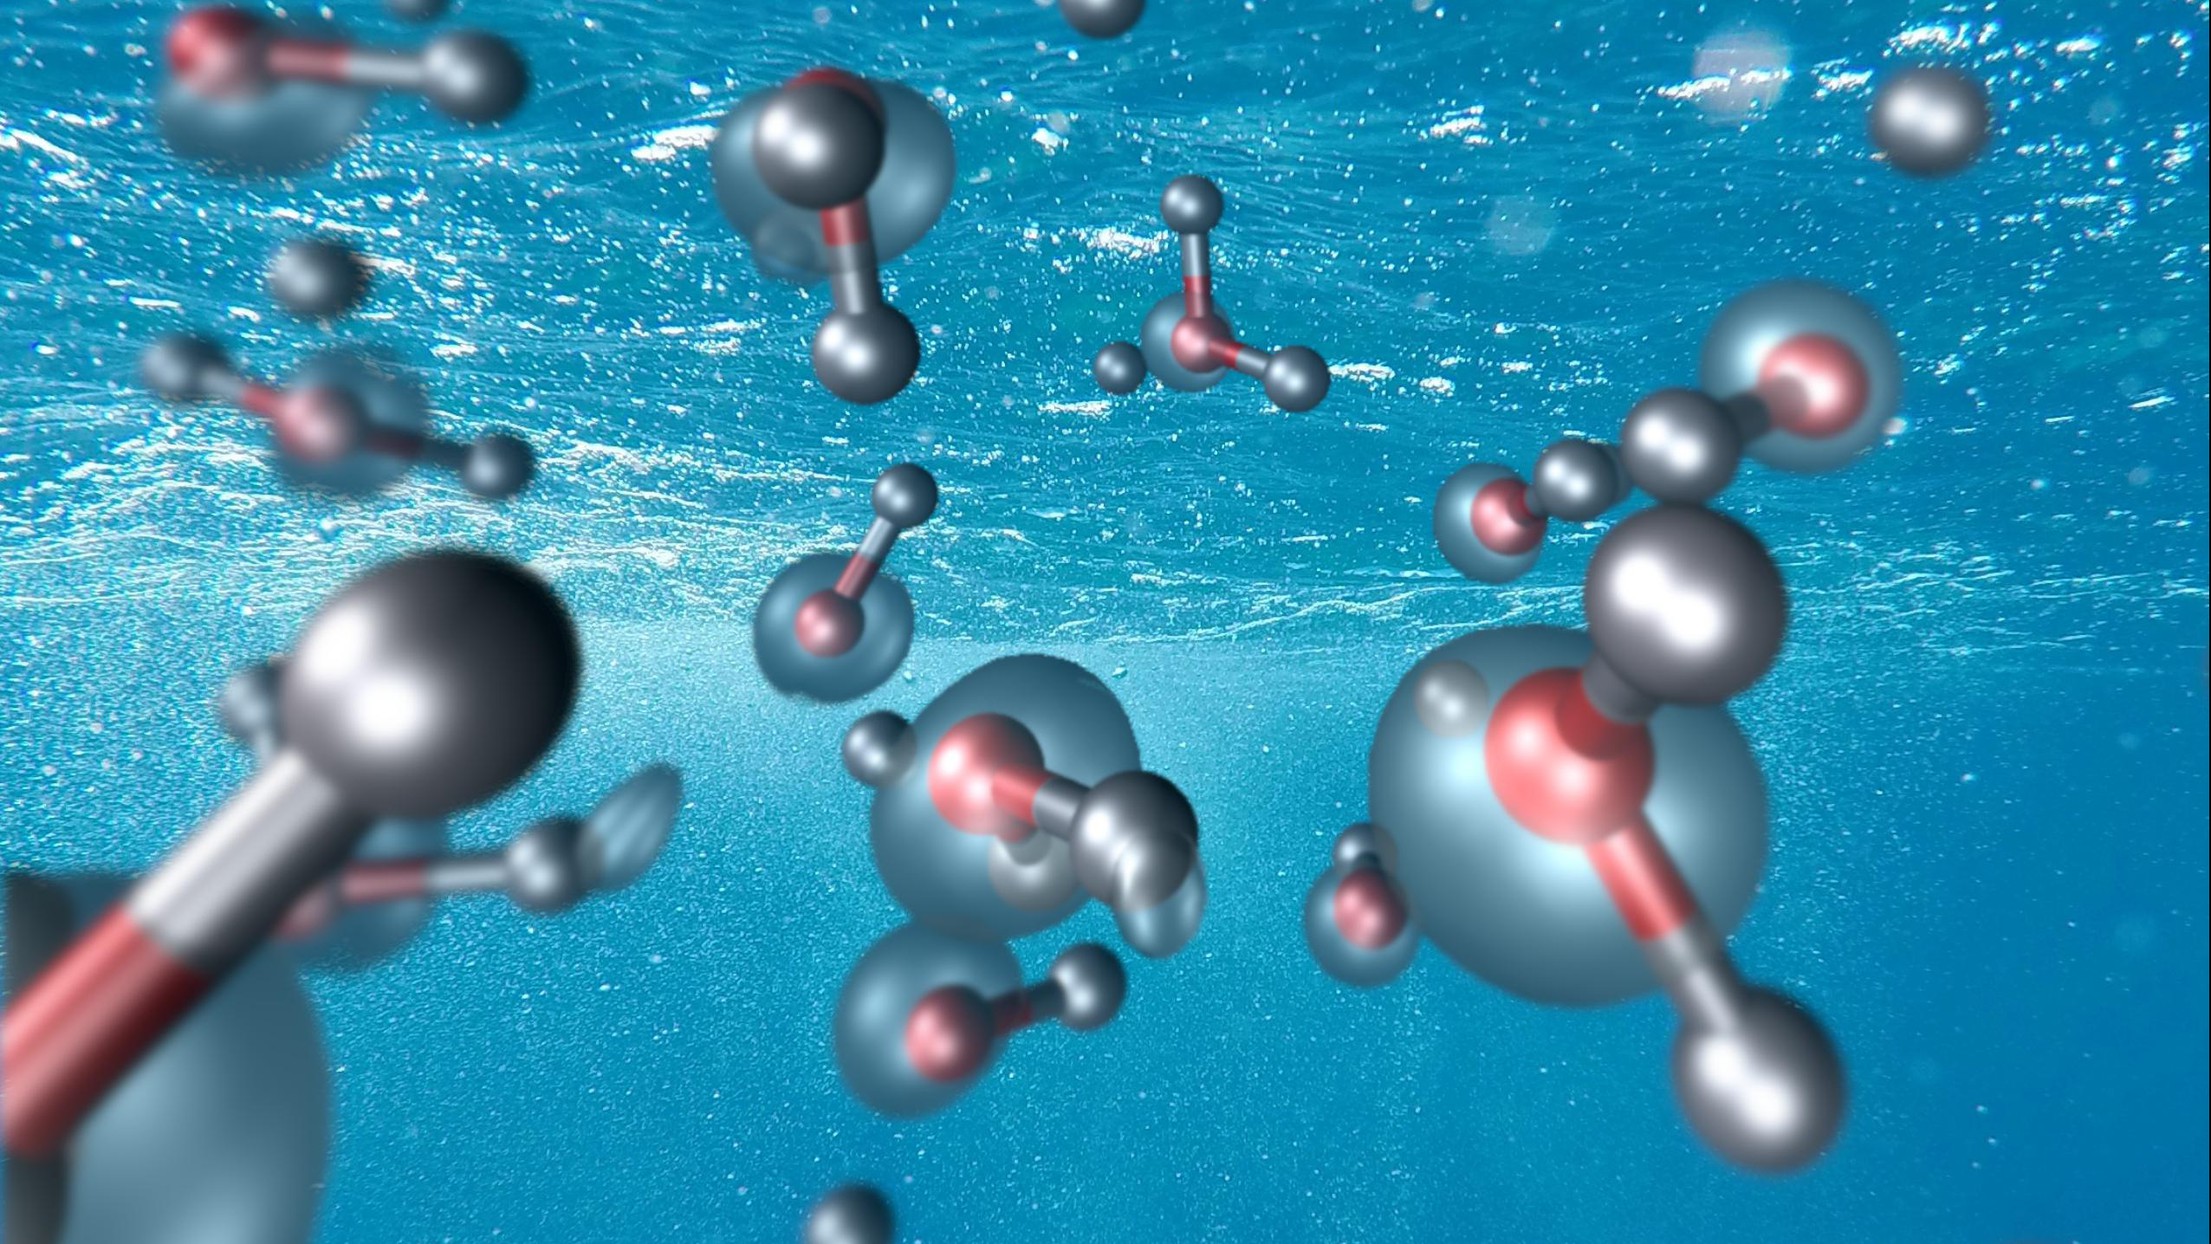 A new theoretical development clarifies water's electronic structure